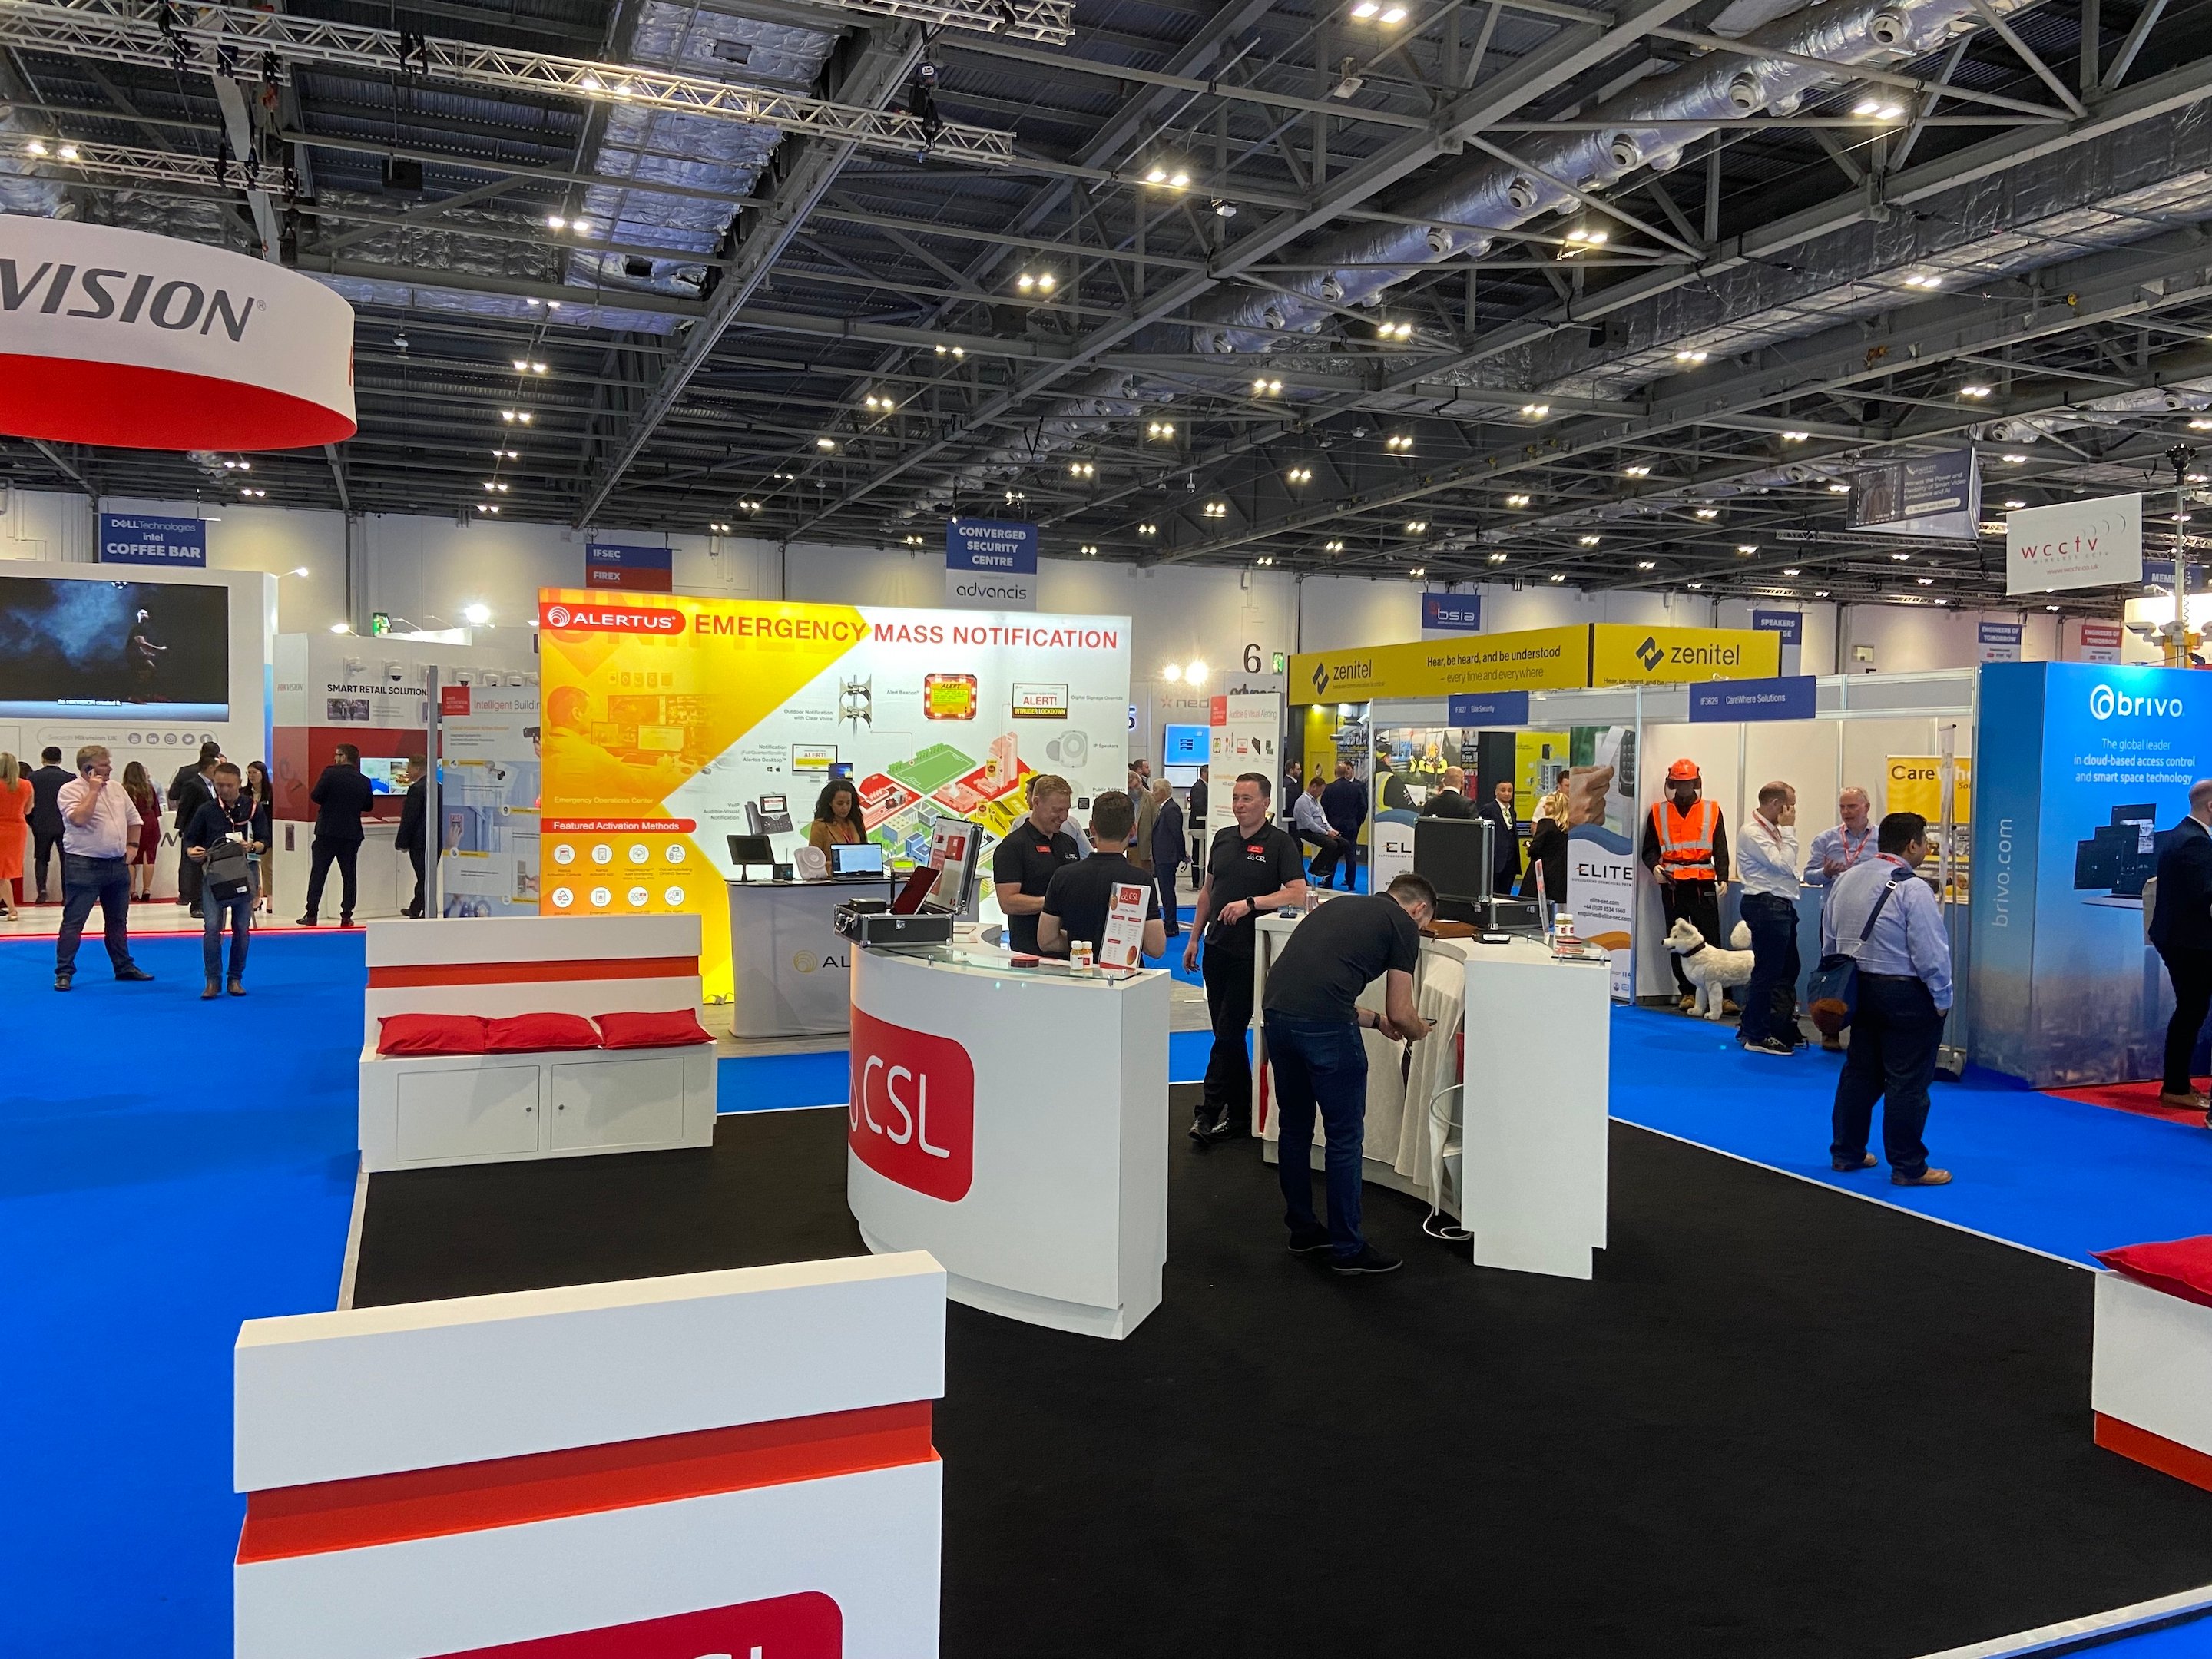 The booths at IFSEC International